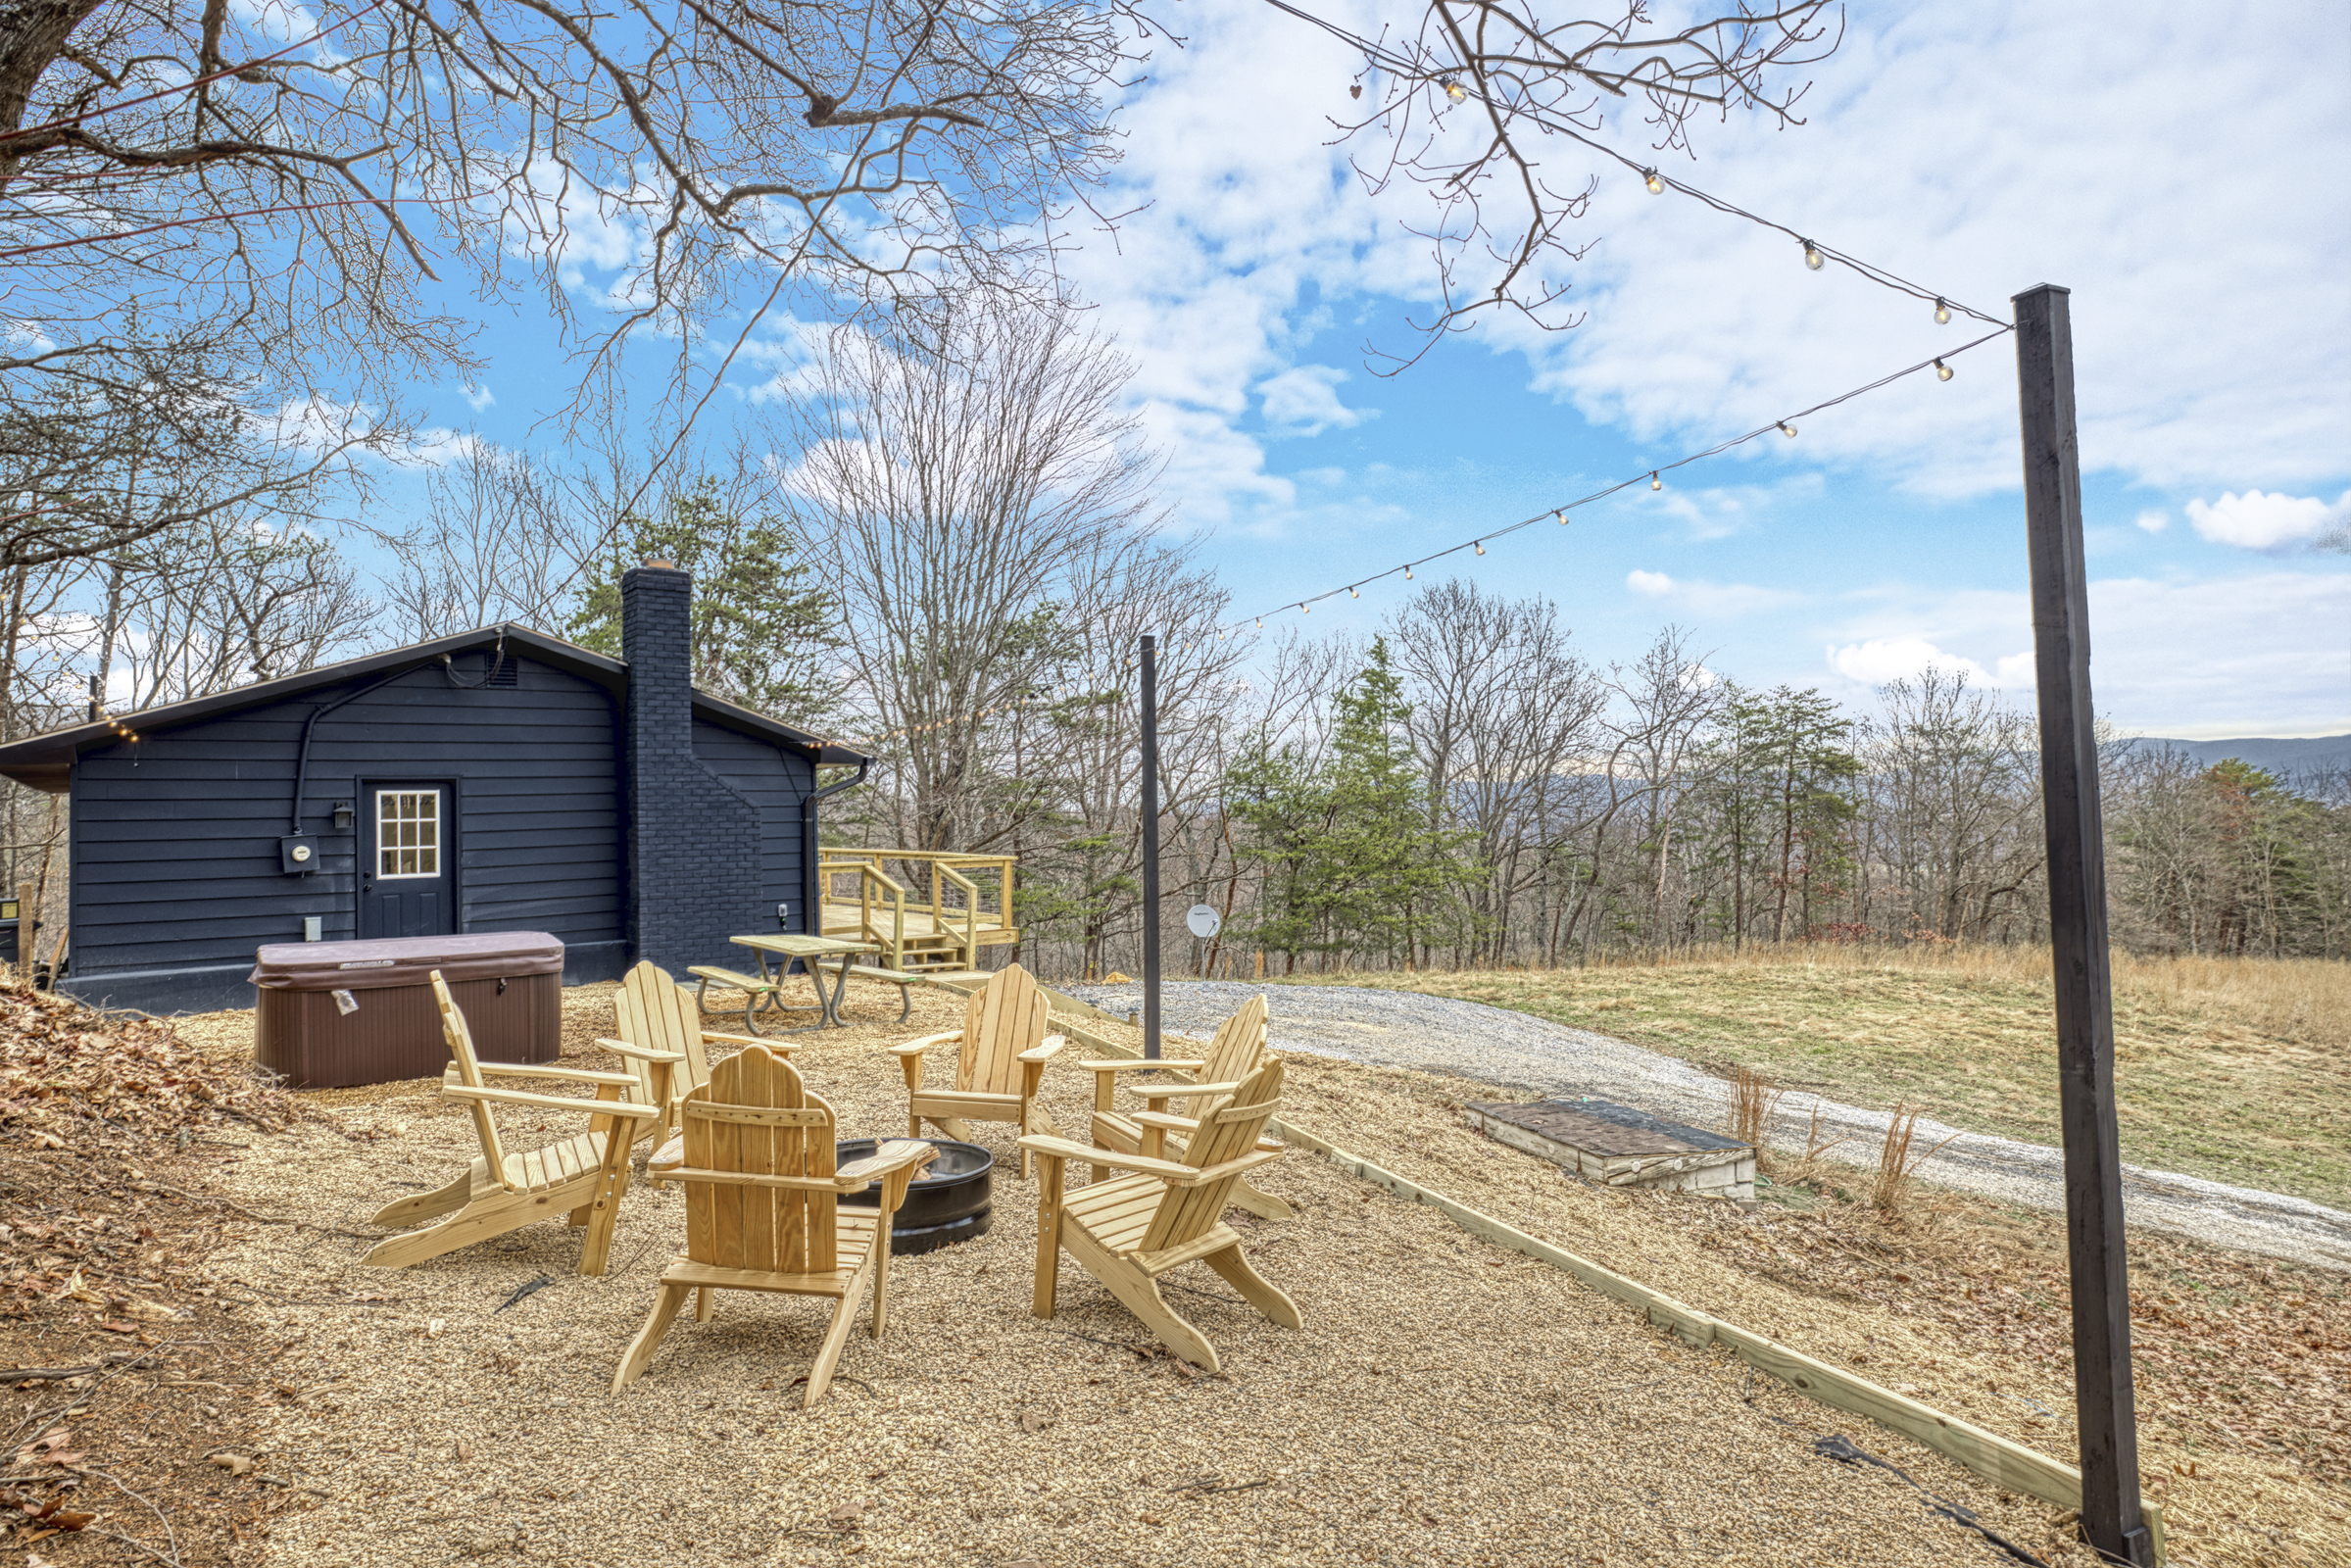 Professional exterior photo of 540 Pine Knob Road in Stanley, VA - showing side with fire pit and hot tub